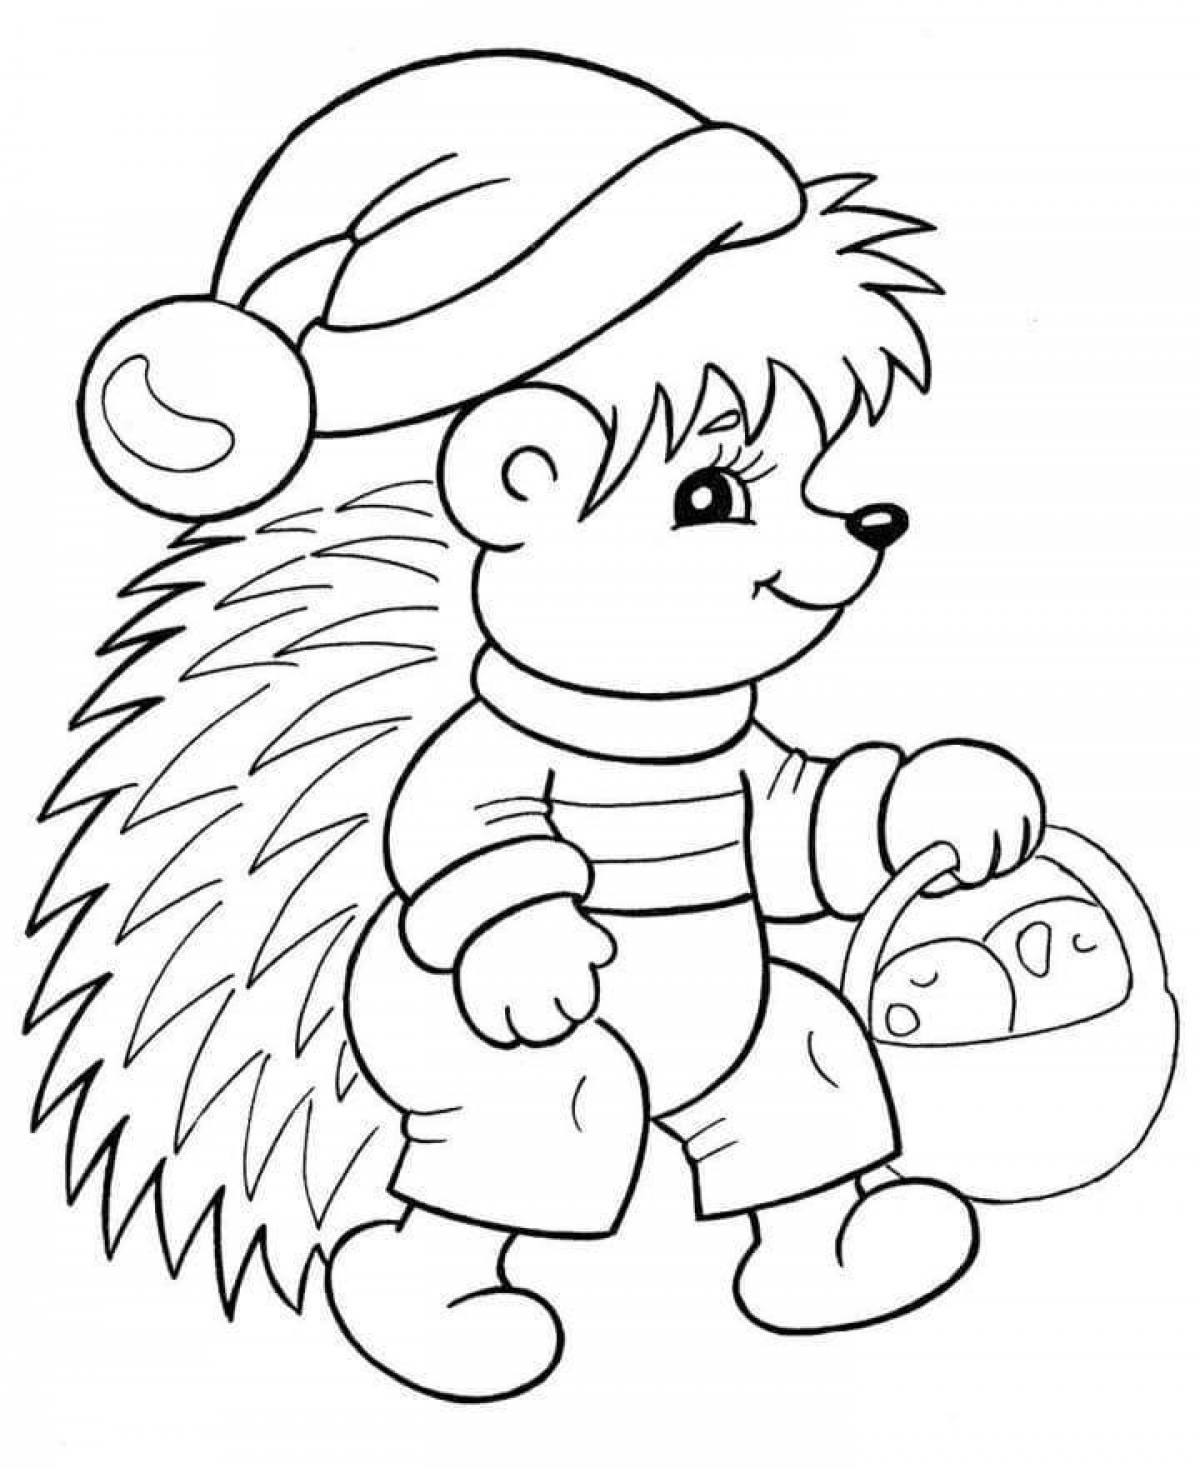 Colorful hedgehog coloring book for kids